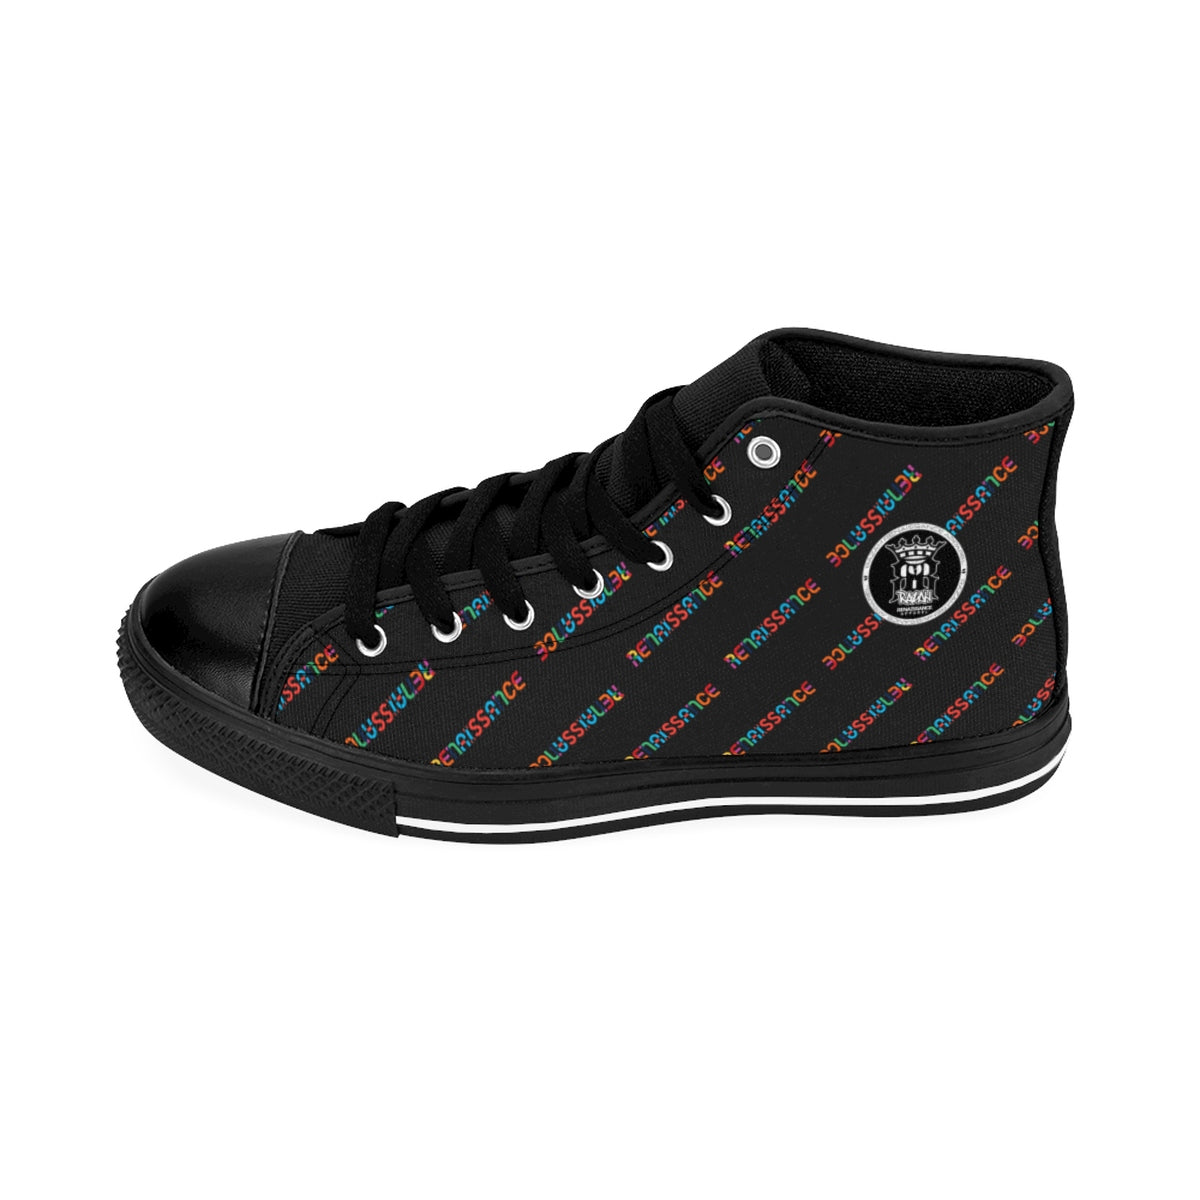 Renaissance Apparel Colored Pattern High-top Sneakers